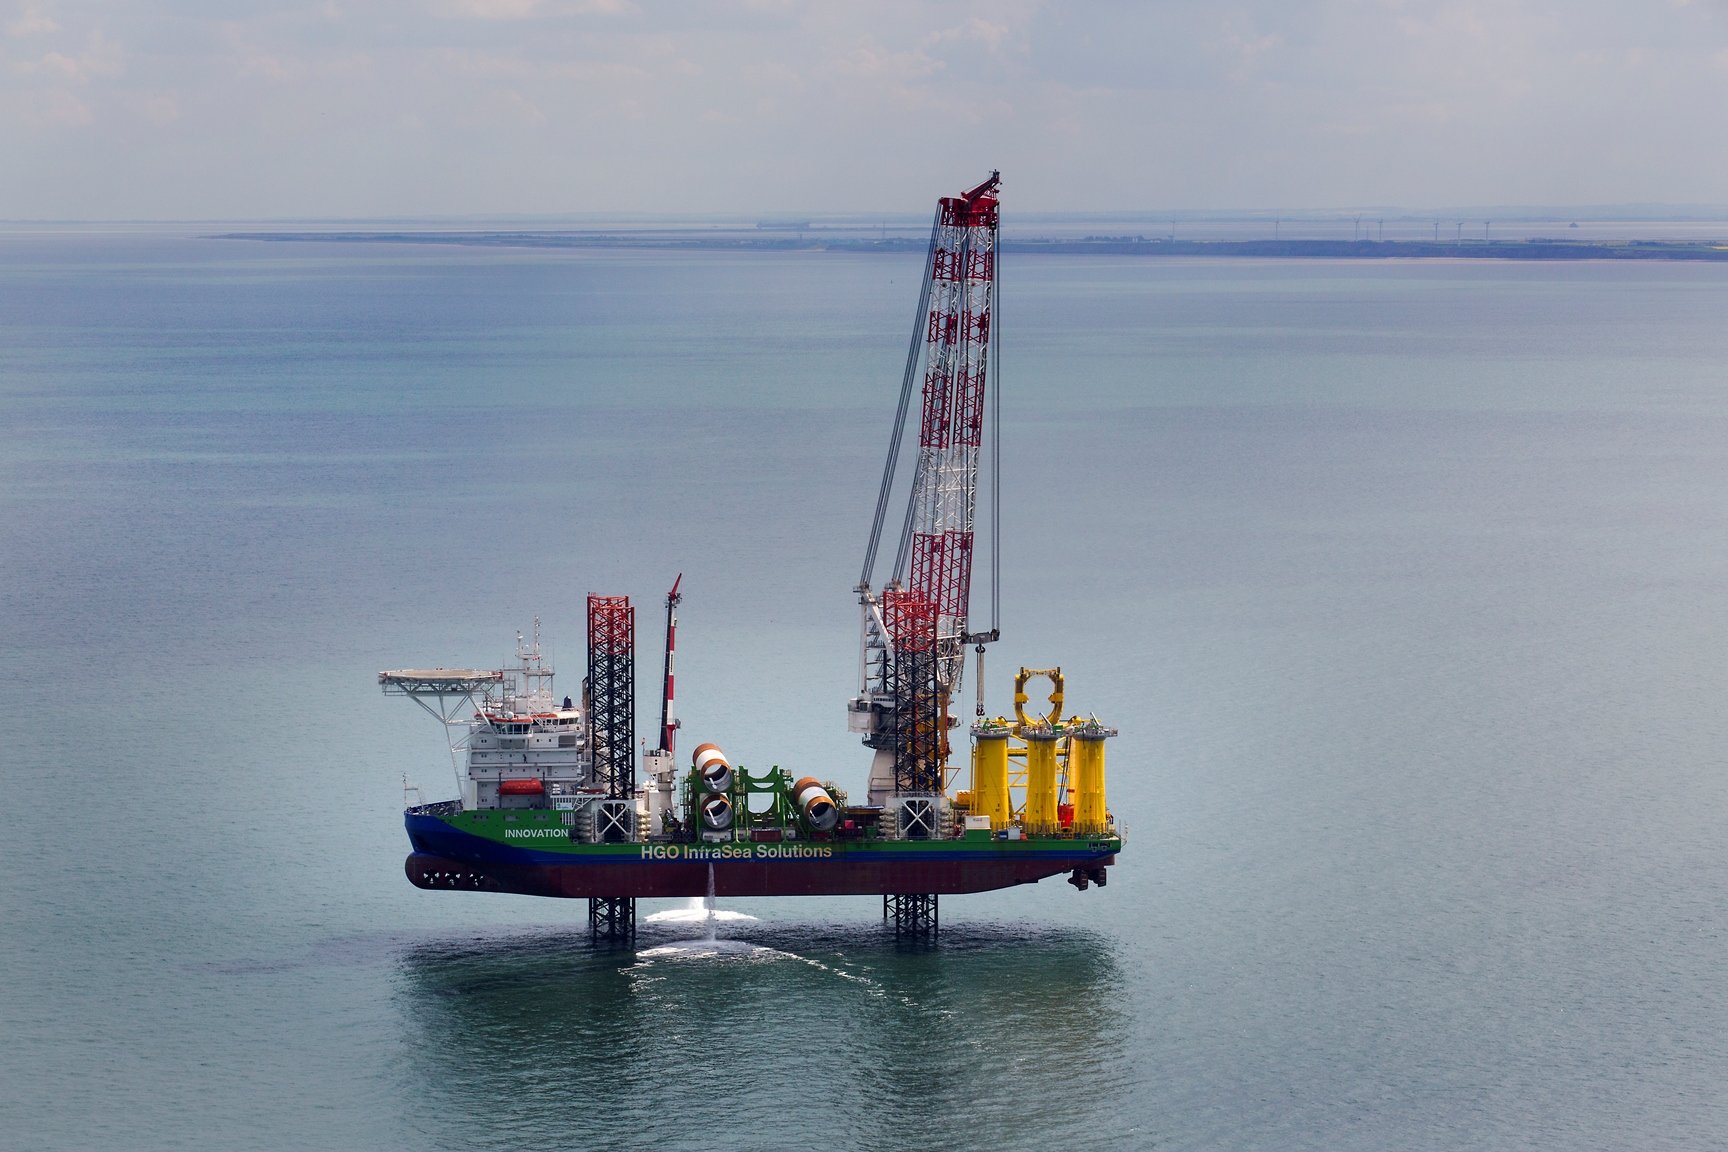 GeoSea Buys HOCHTIEF Offshore Assets, Becomes Full Owner of 'Innovation'